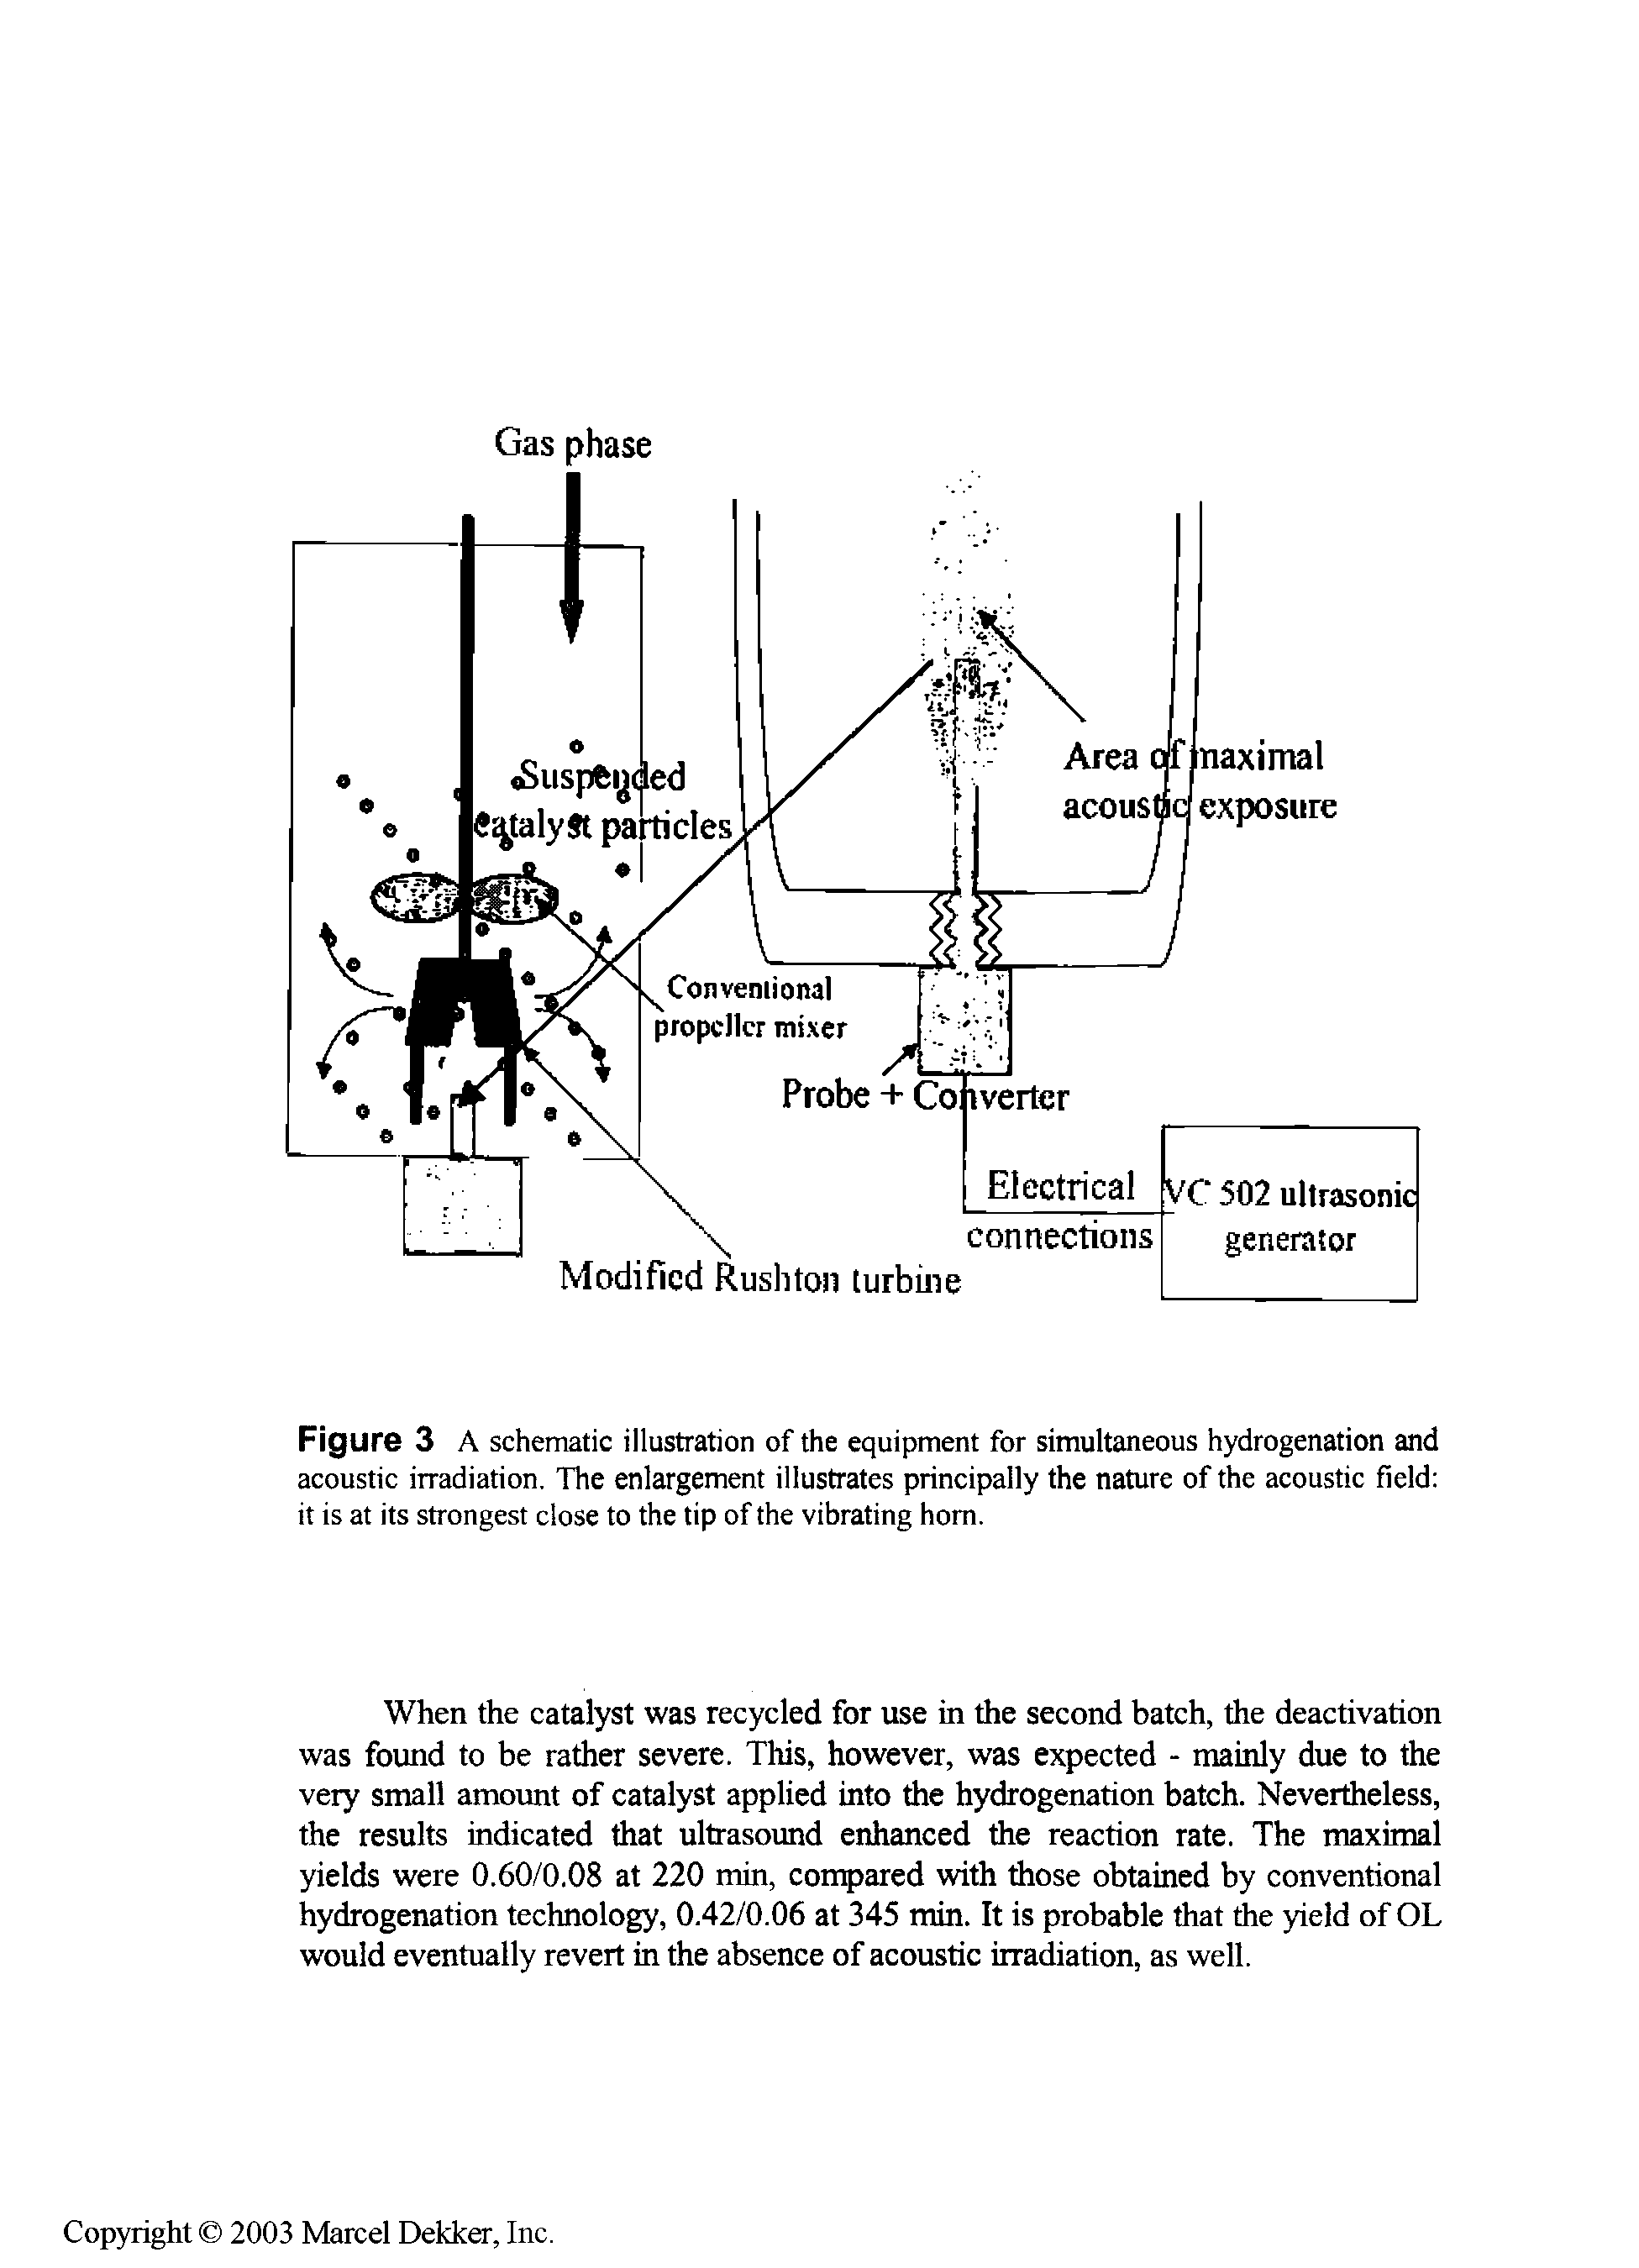 Figure 3 A schematic illustration of the equipment for simultaneous hydrogenation and acoustic irradiation. The enlargement illustrates principally the nature of the acoustic field it is at its strongest close to the tip of the vibrating horn.